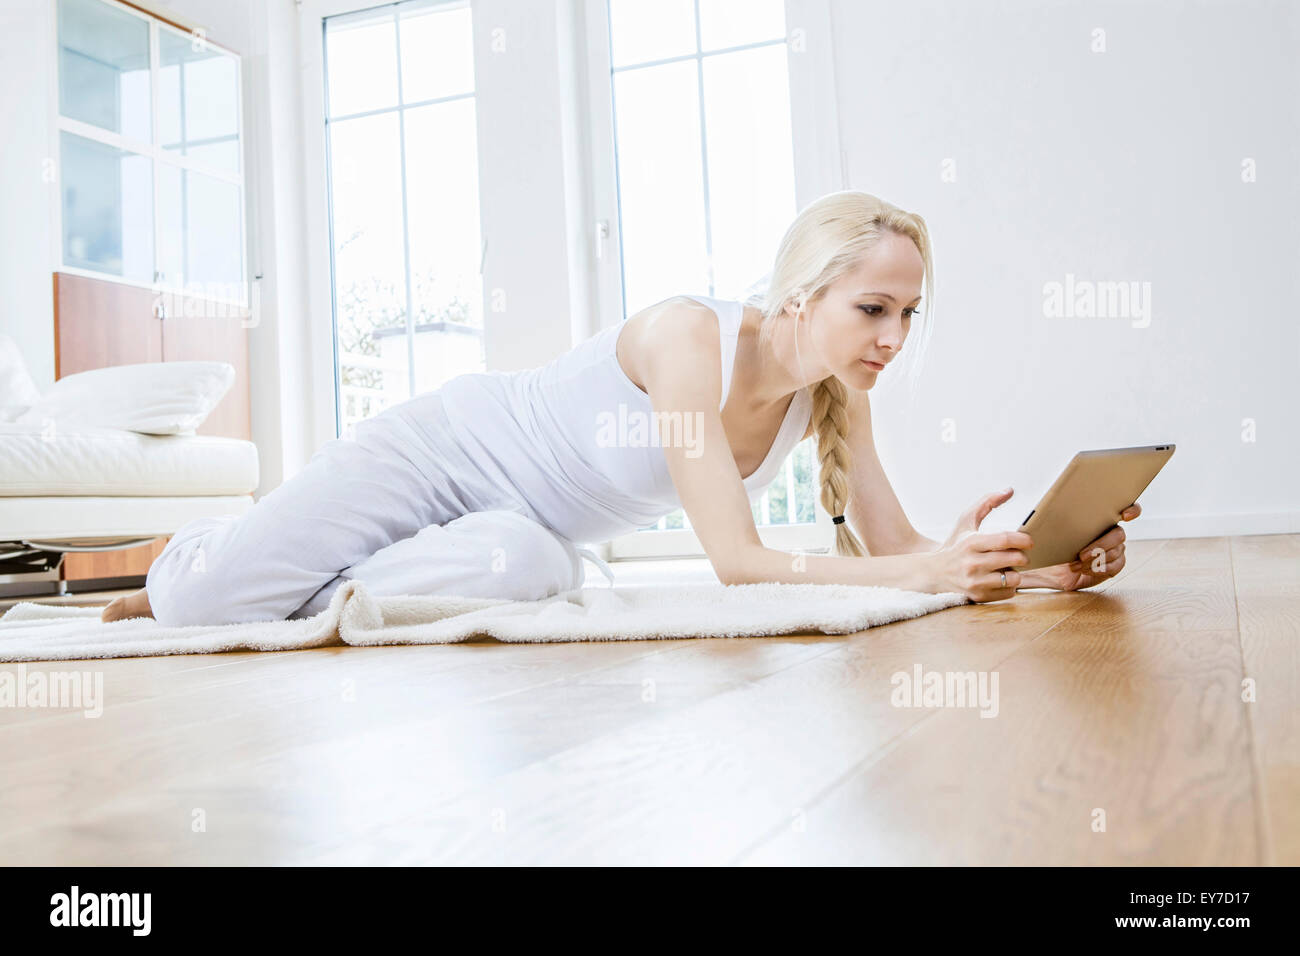 Young woman using digital tablet Banque D'Images